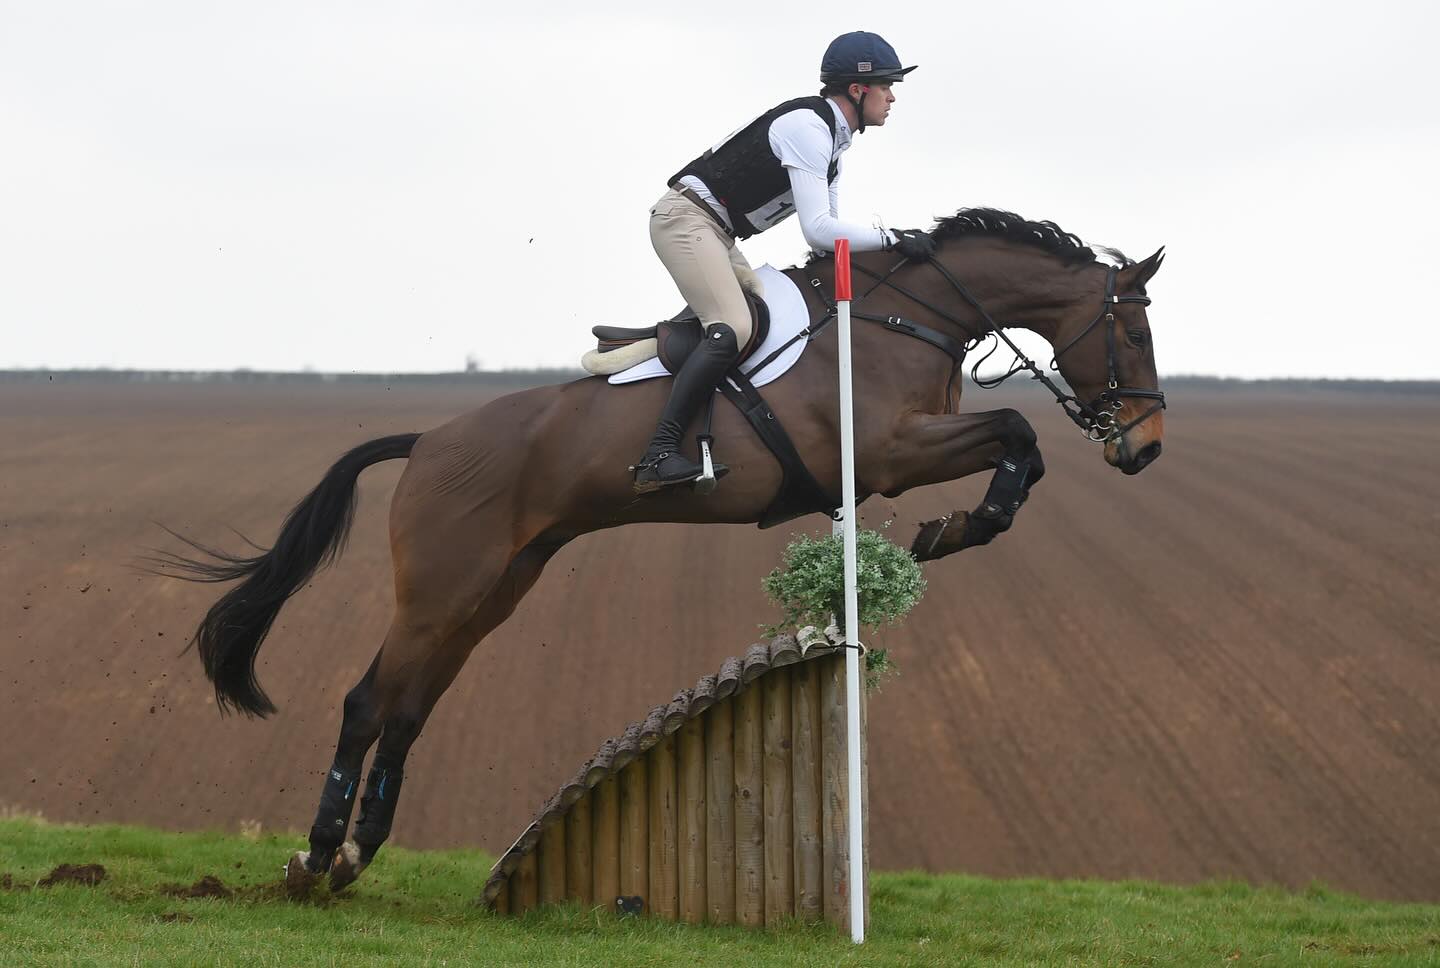 Sam Ecroyd, event rider cross country at Oasby Horse Trials